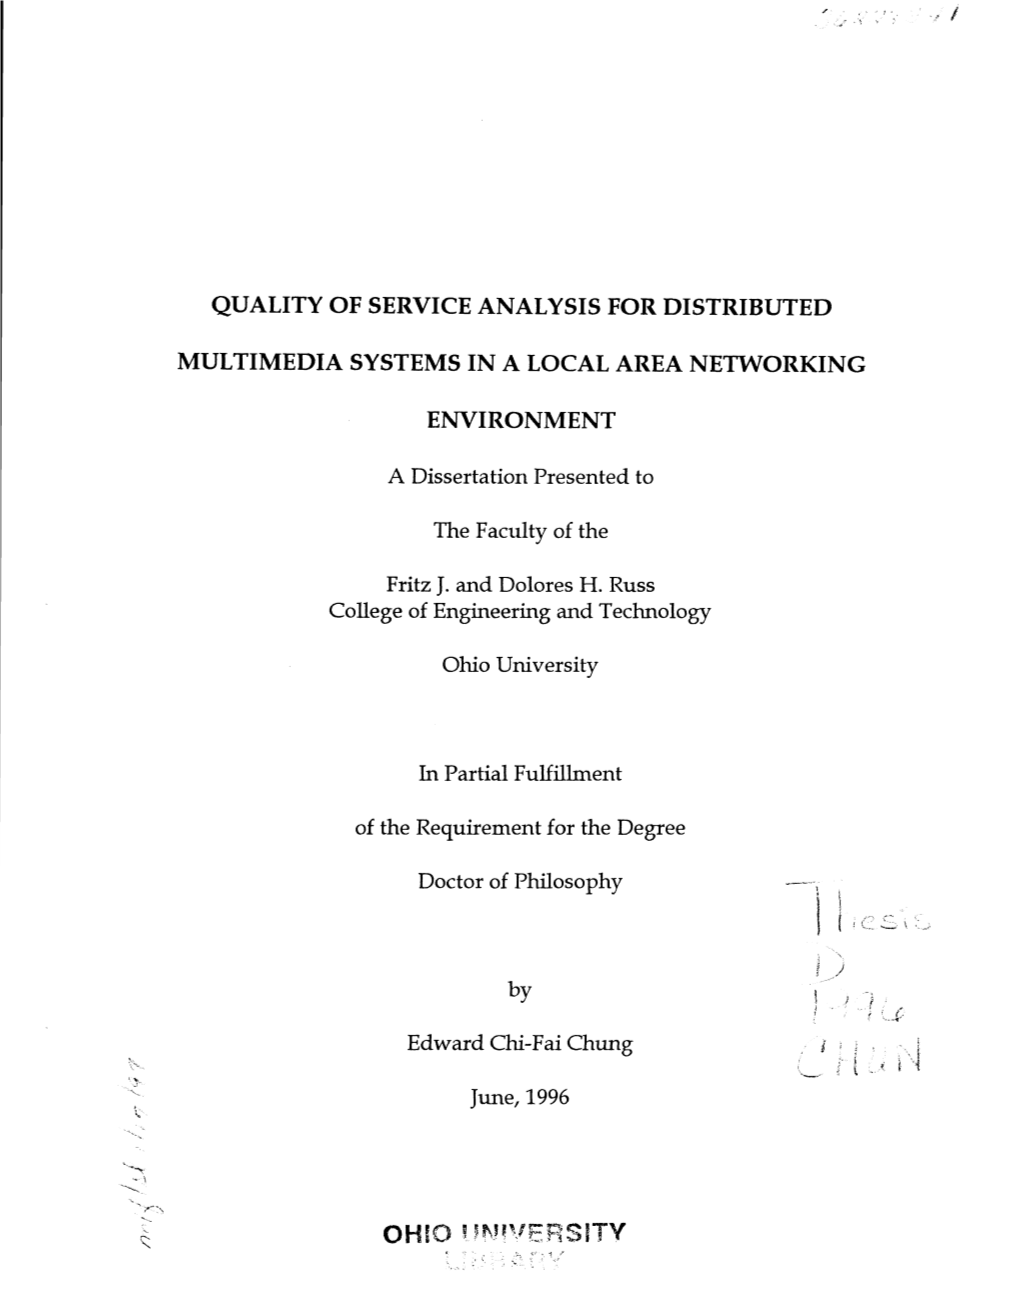 Quality of Service Analysis for Distributed Multimedia Systems in a Local Area Networking Environment (148 Pp.)